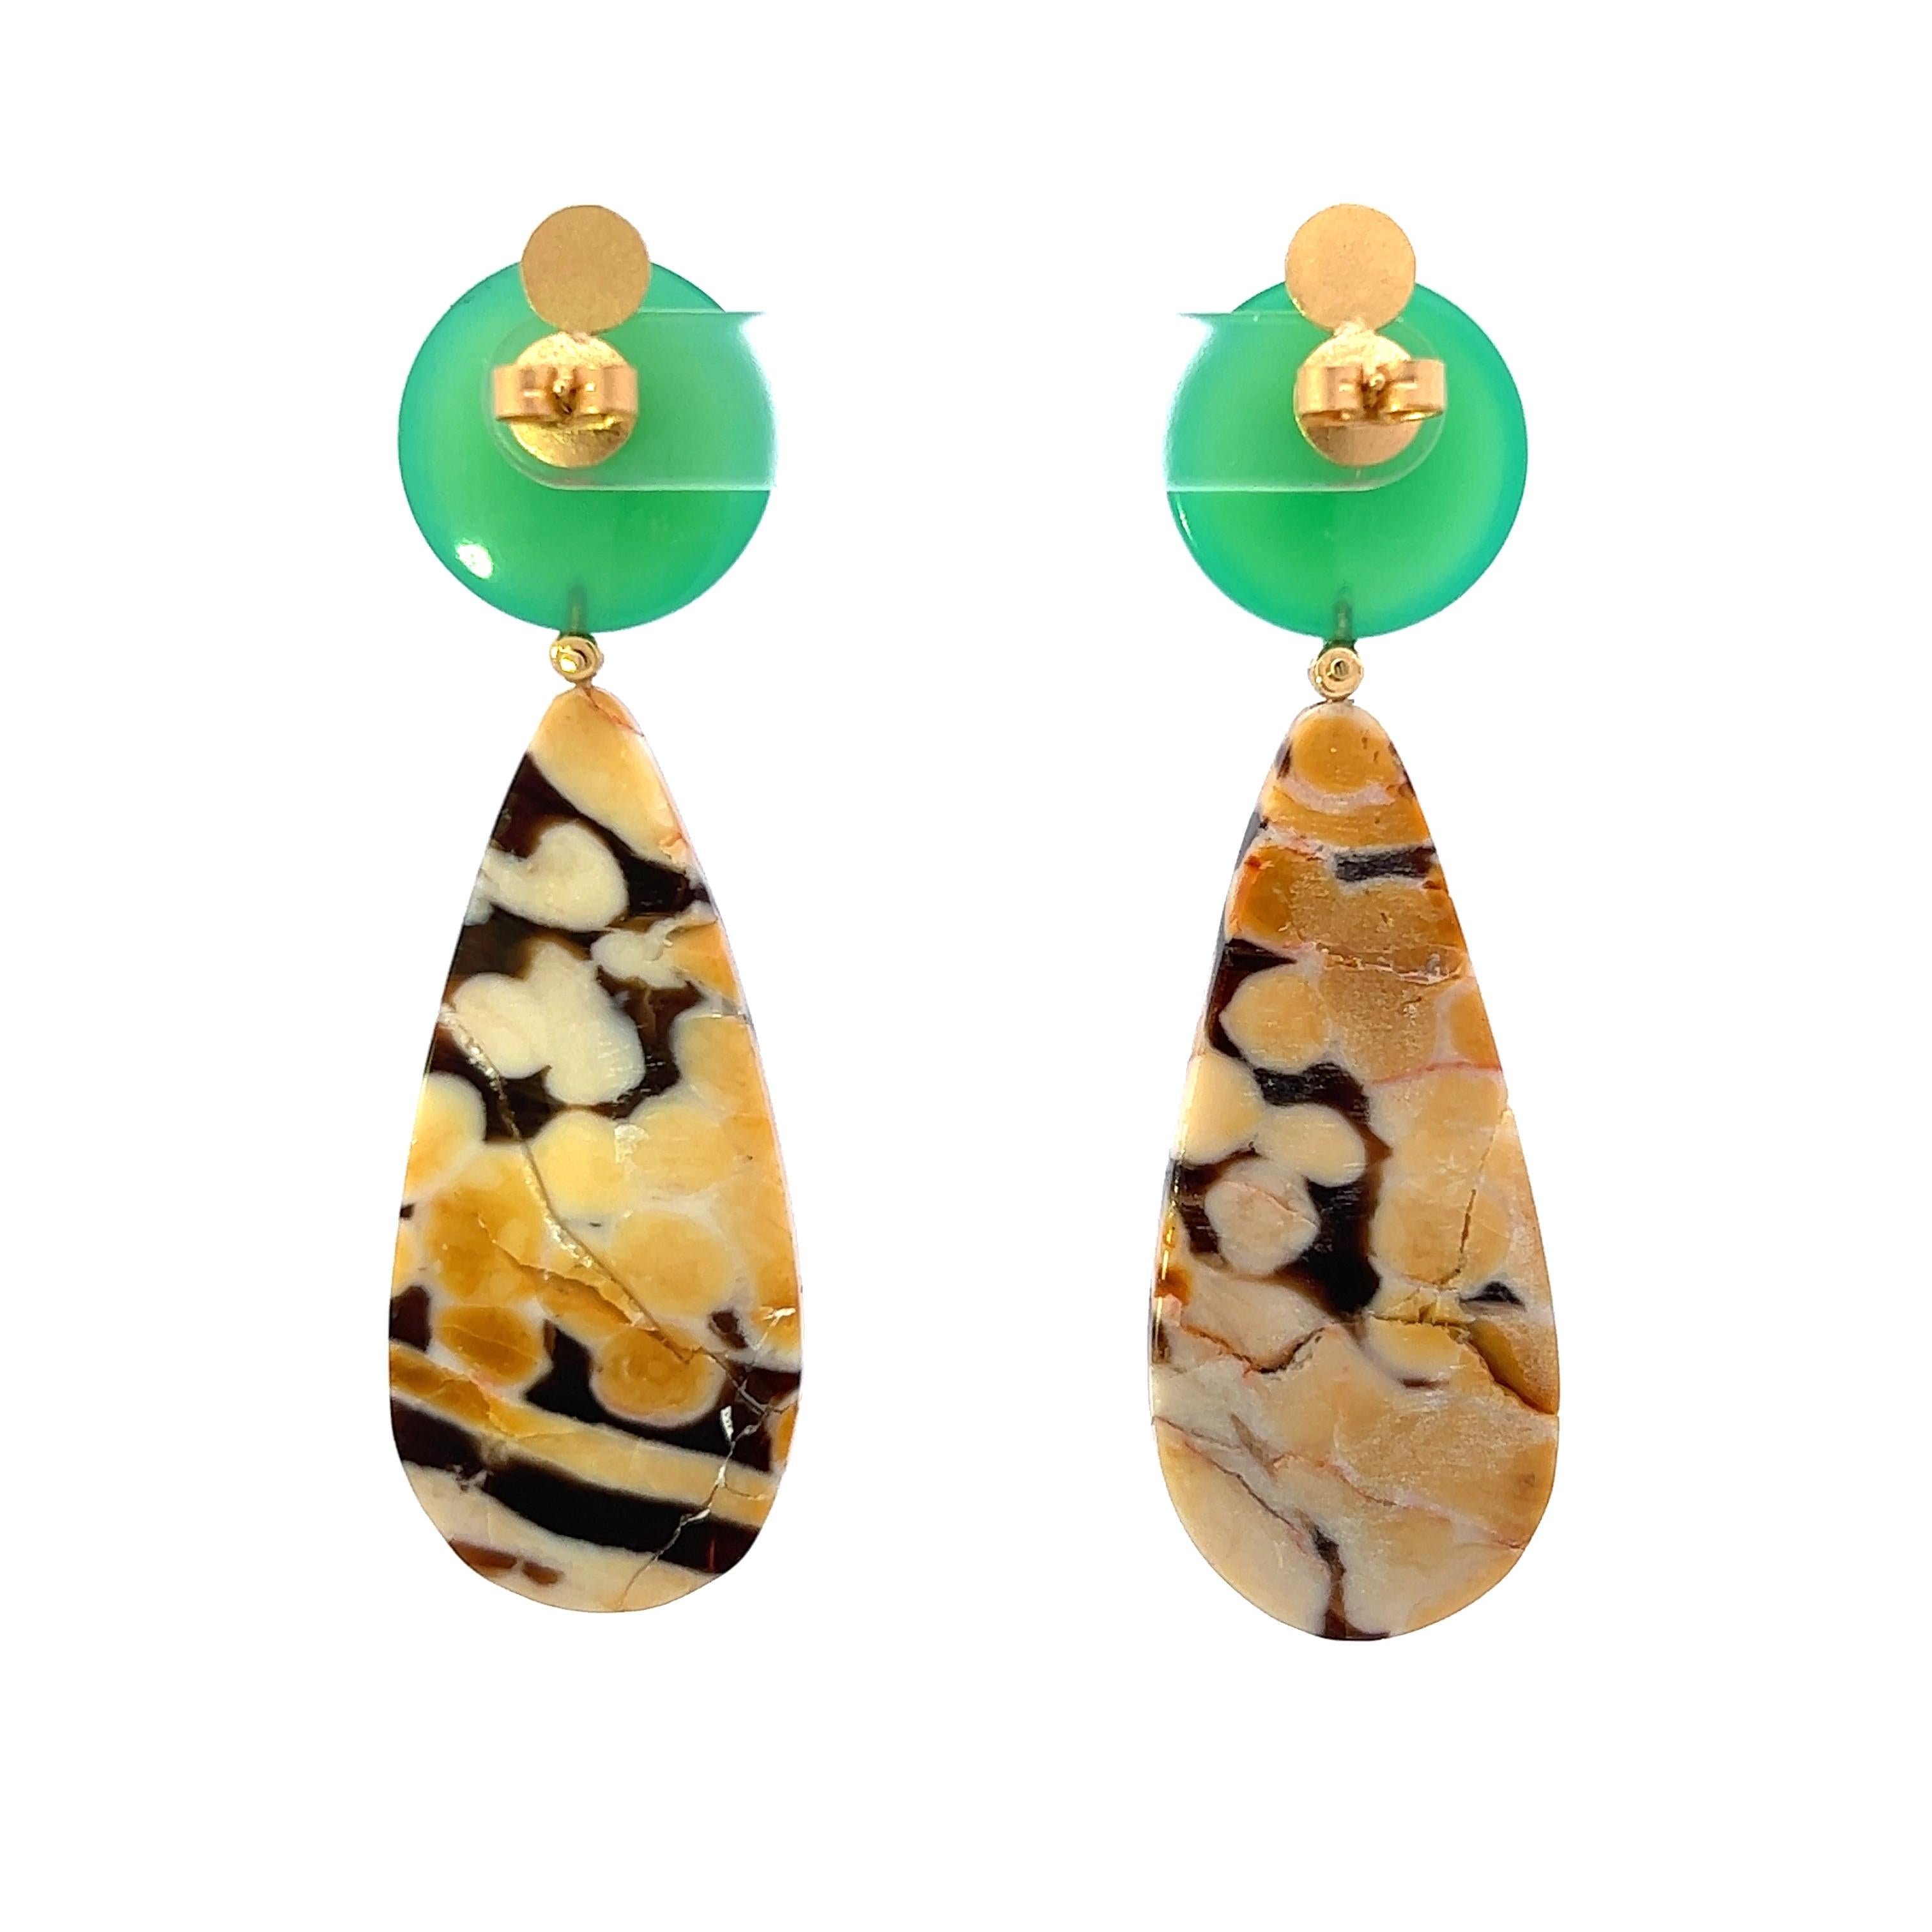 Polished circle cut Chrysoprase with White Diamonds bezel set in 18 carat recycled gold followed by teardrop shaped polished Australian Petrified Peanut Wood. These earrings are a statement without the weight of a typical gemstone earring.